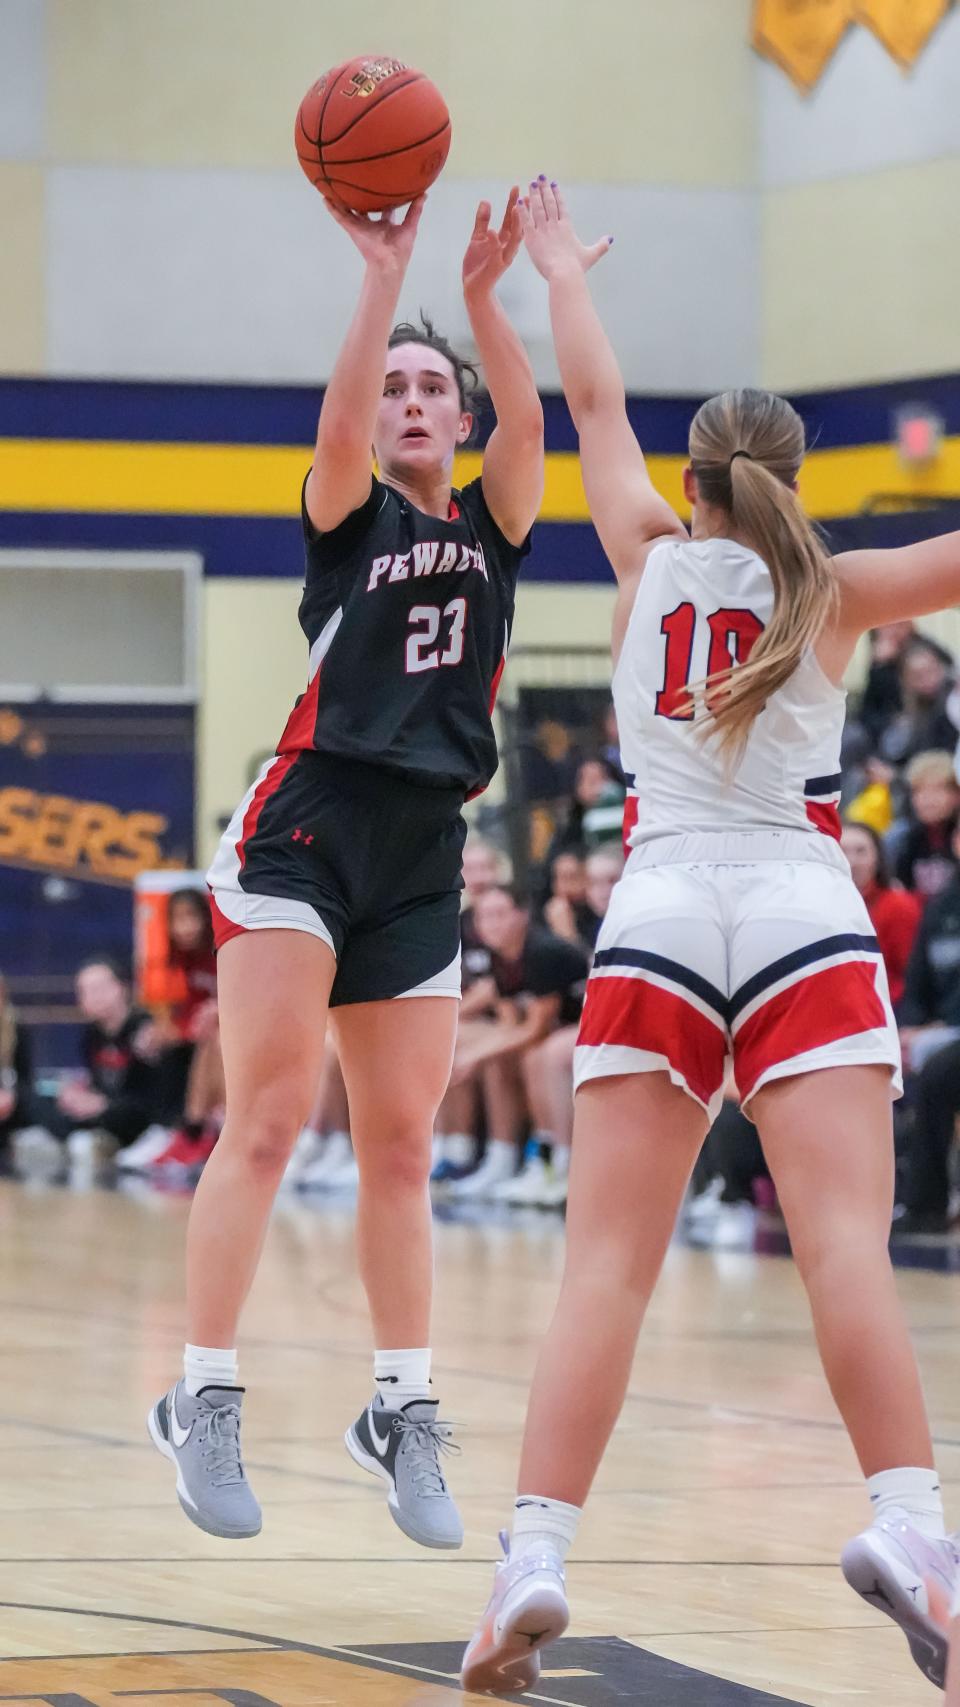 Pewaukee's Giselle Janowski (23) elevates for a shot during the game against Hortonville at the Kettle Moraine Thanksgiving Classic girls basketball tournament in Wales on Friday, Nov. 24, 2023.